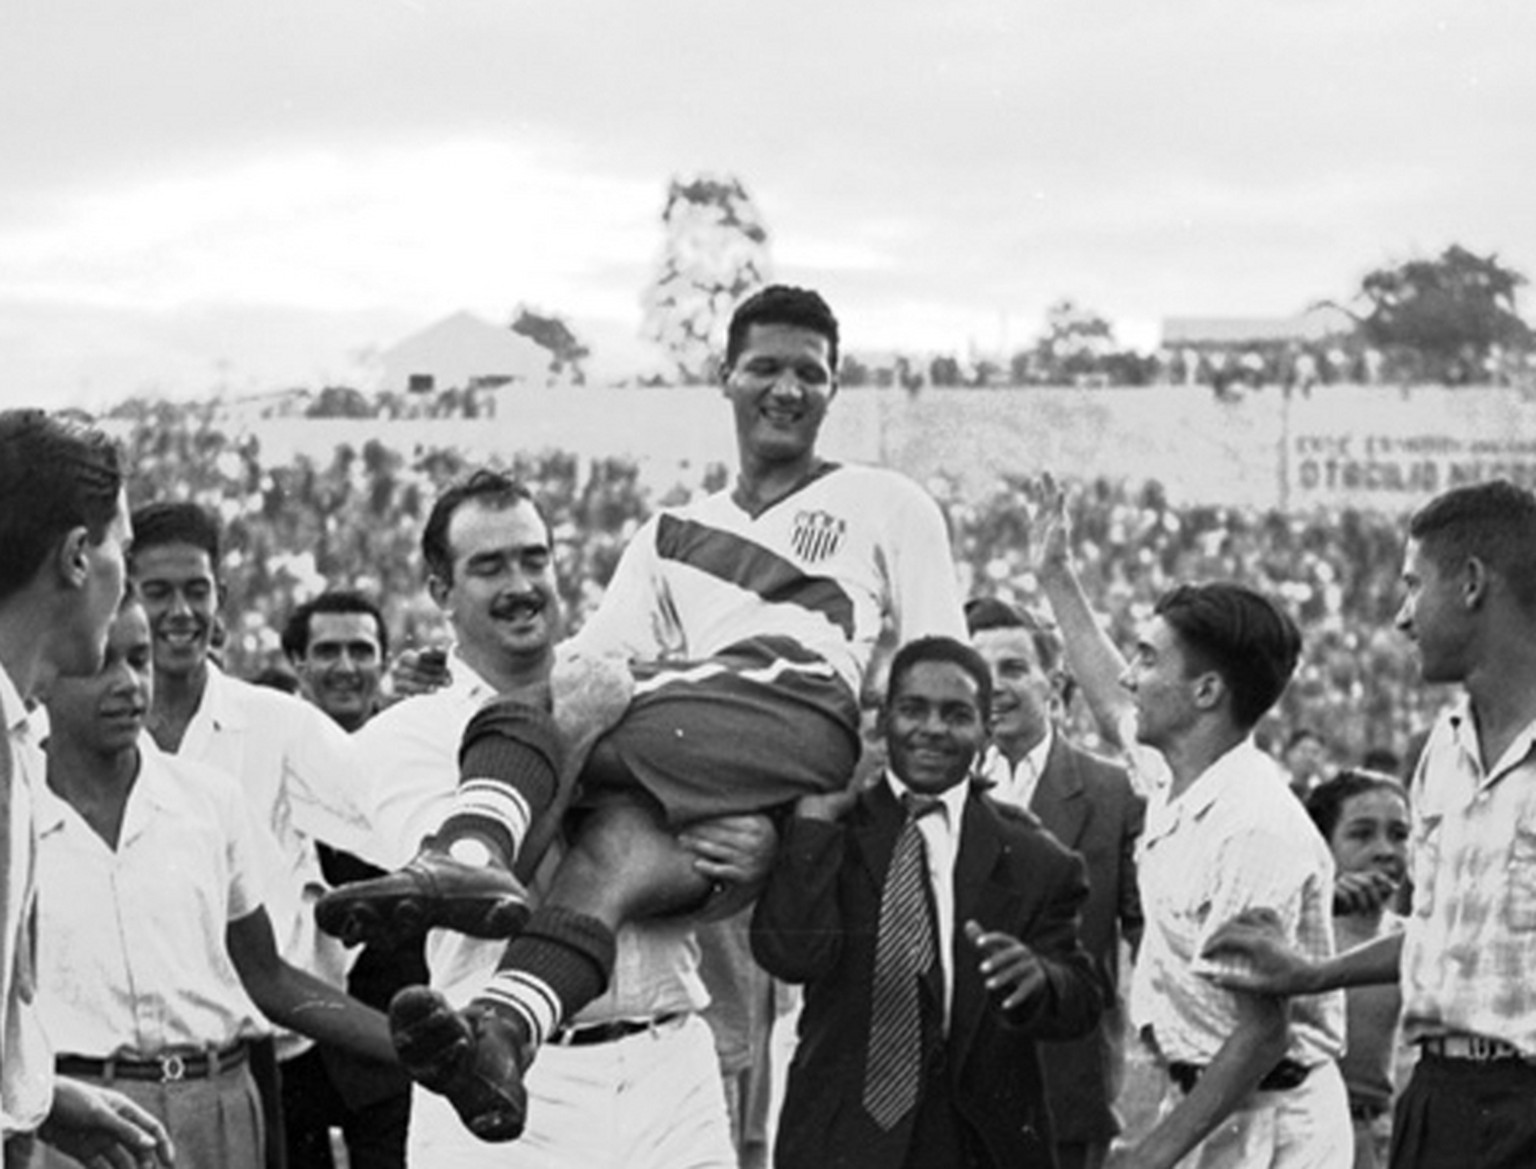 FILE - In this June 28, 1950 file photo, United States soccer player Joe Gaetjens is carried off by cheering fans after the USA team beat England 1-0 in a World Cup soccer match in Belo Horizonte, Bra ...